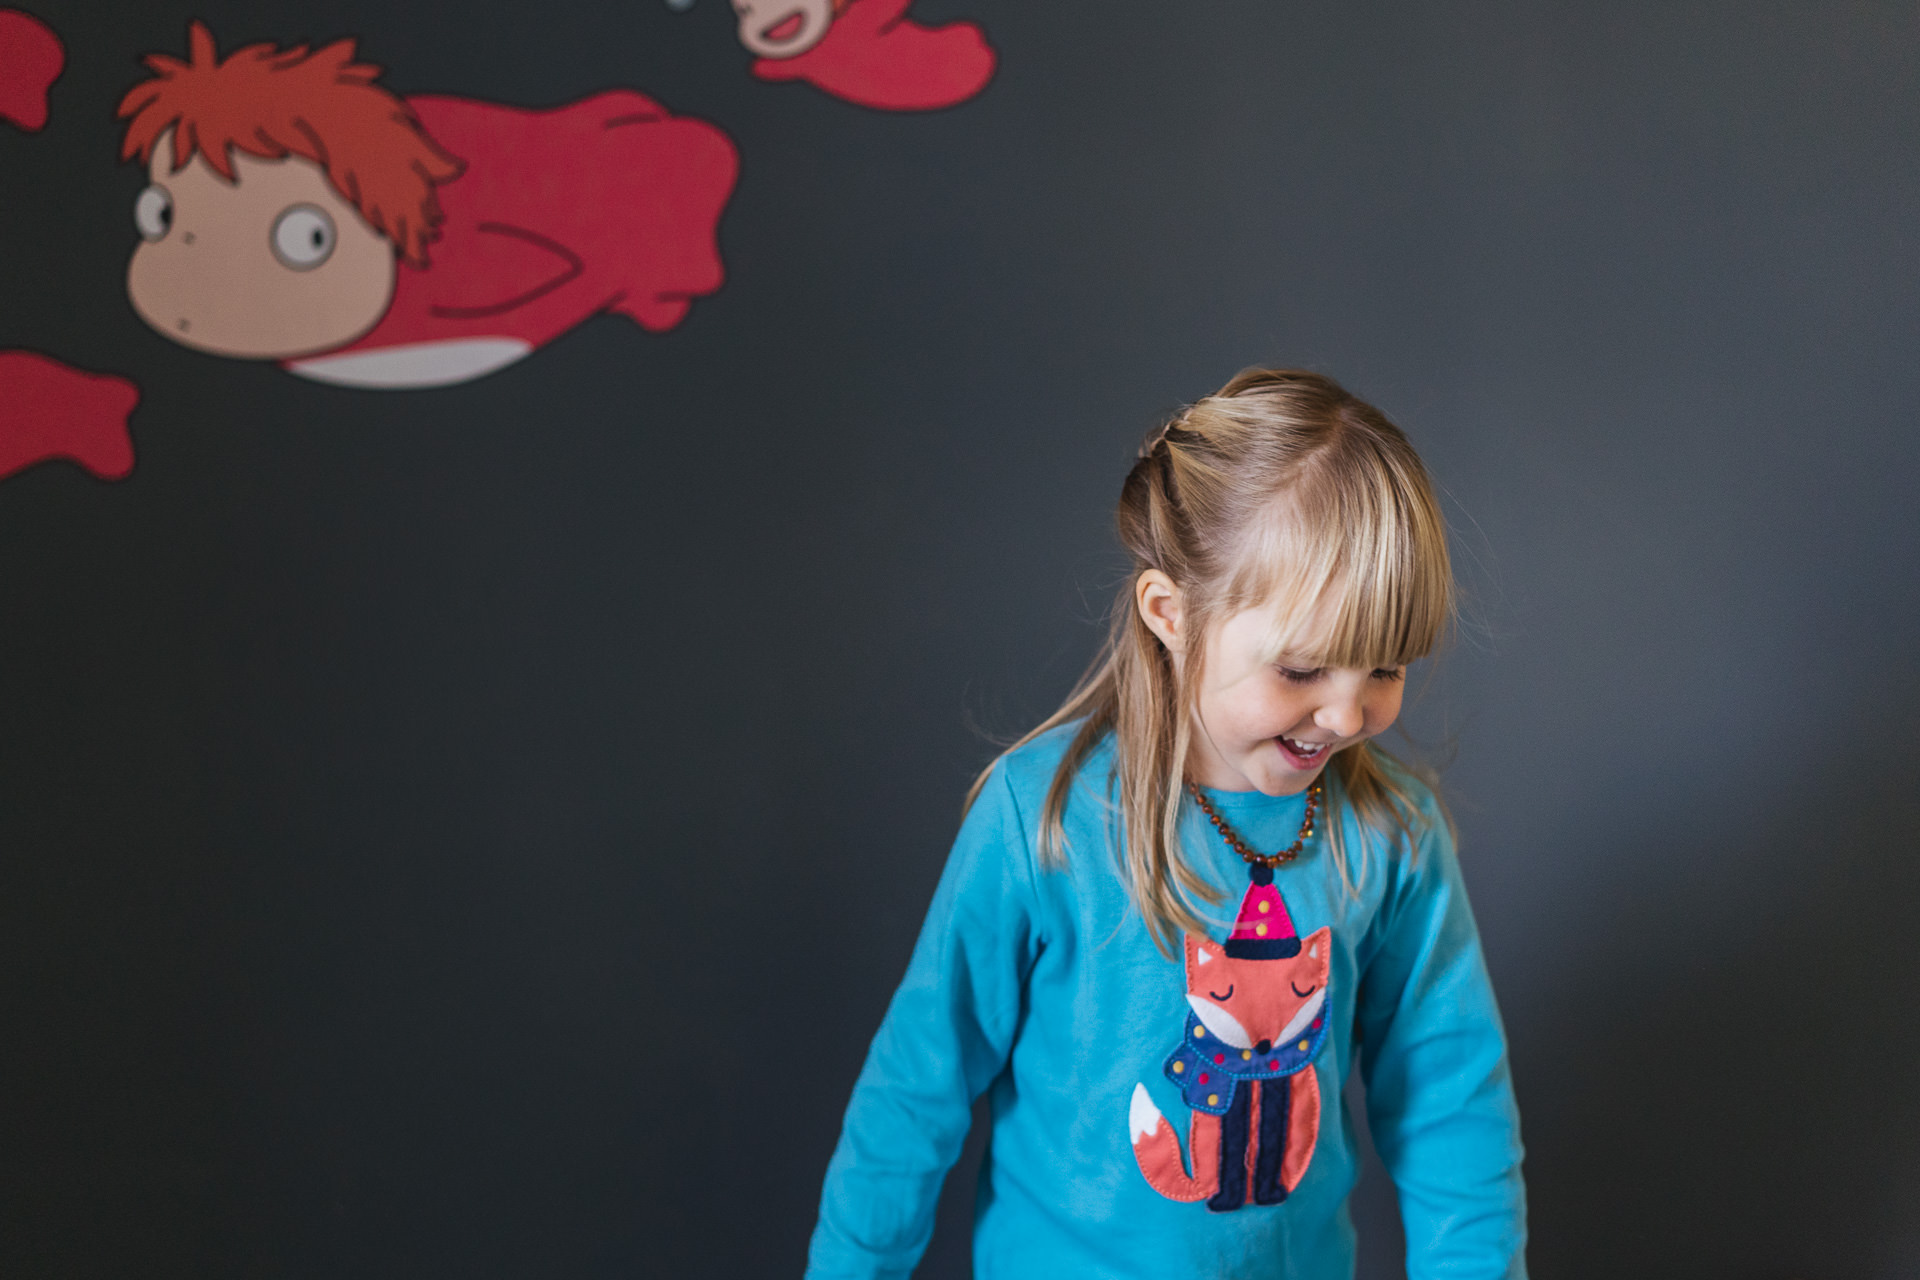 A young girl laughing with cartoon stickers on the wall behind